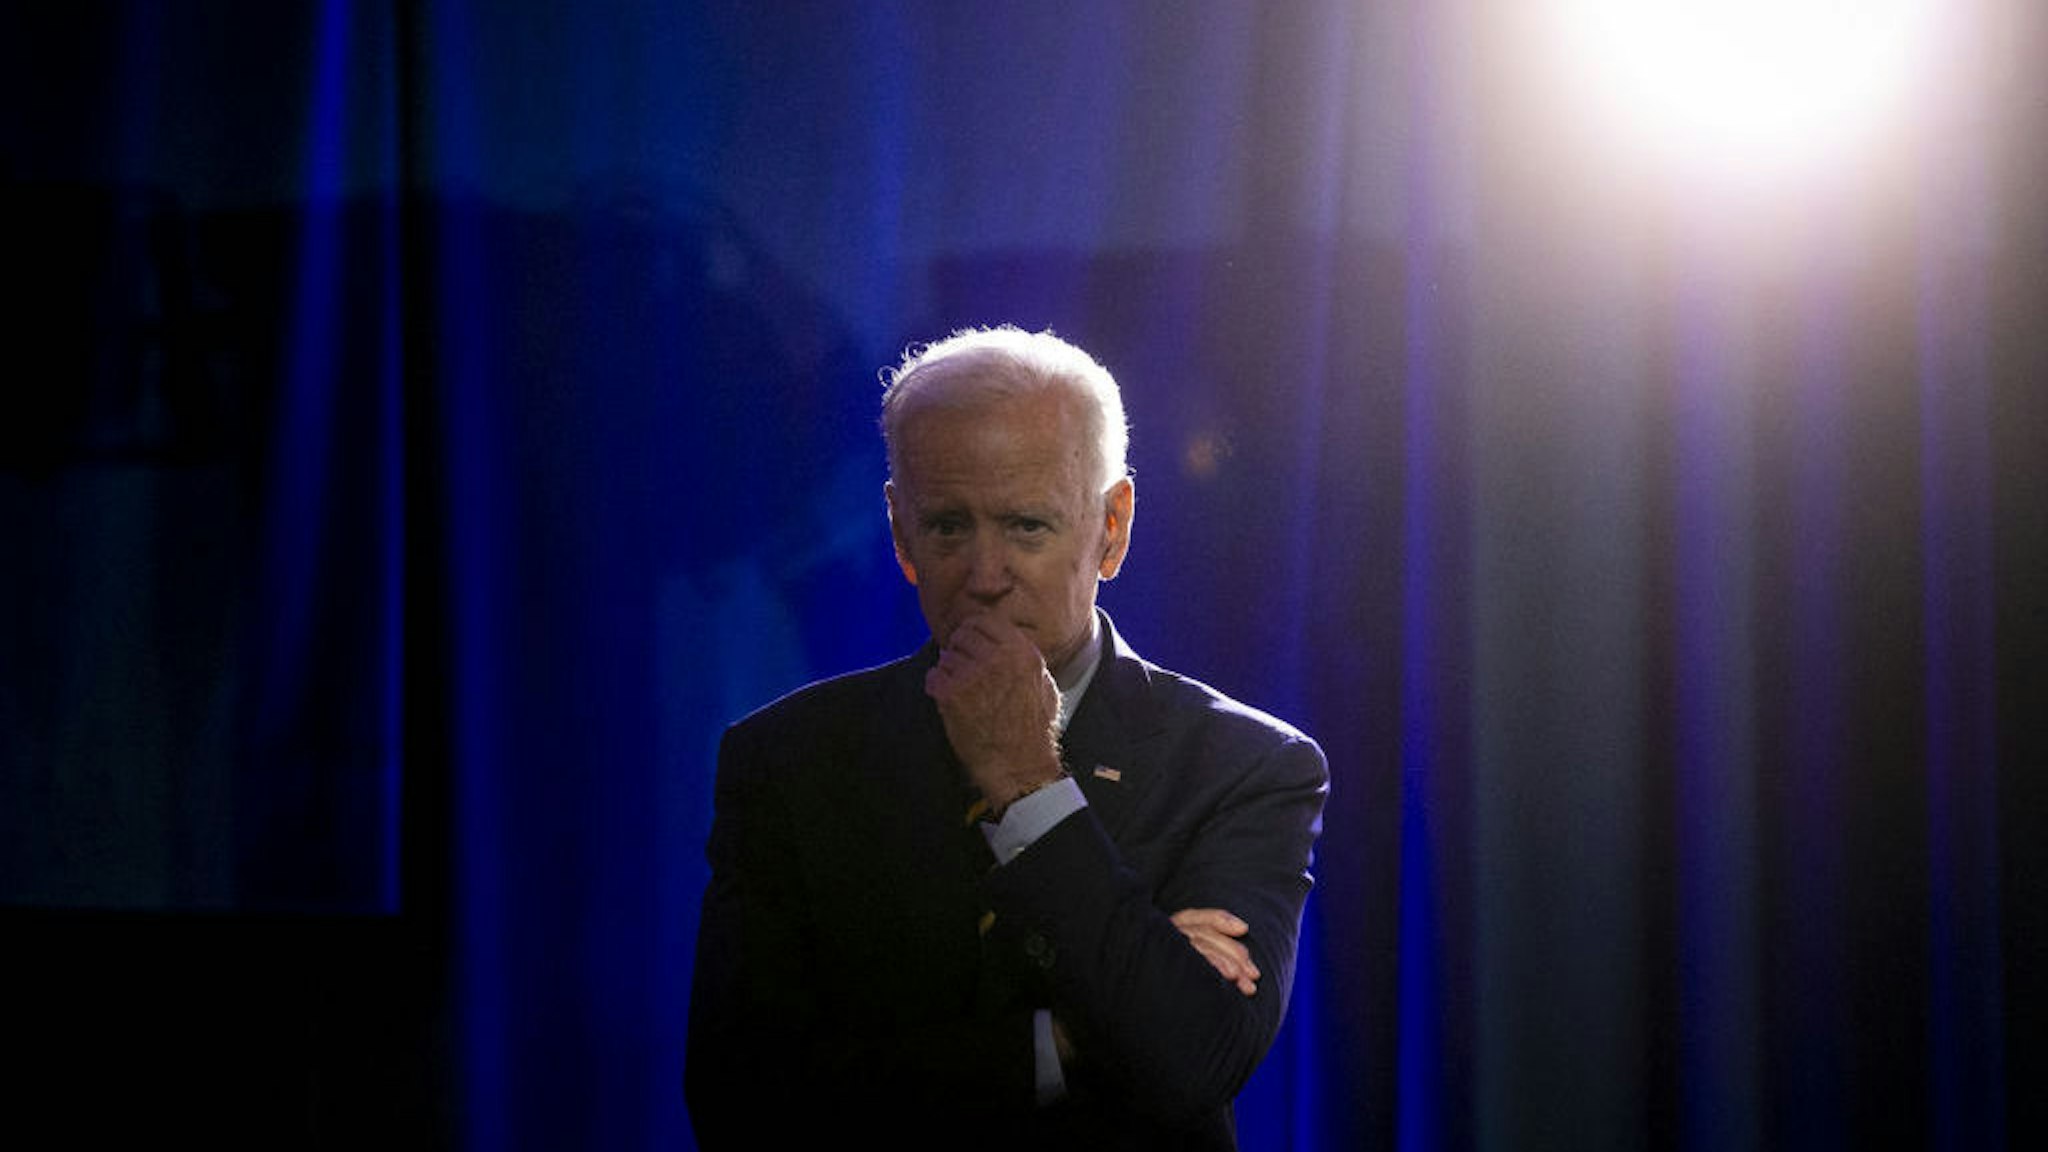 Former U.S. Vice President Joe Biden, 2020 Democratic presidential candidate, listens during the Planned Parenthood Action Fund (PPAF) We Decide 2020 Election Membership Forum in Columbia, South Carolina, U.S., on Saturday, June 22, 2019. Monday, January 20, 2020, marks the third anniversary of U.S. President Donald Trump's inauguration. Our editors select the best archive images looking back over Trump’s term in office. Photographer: Al Drago/Bloomberg